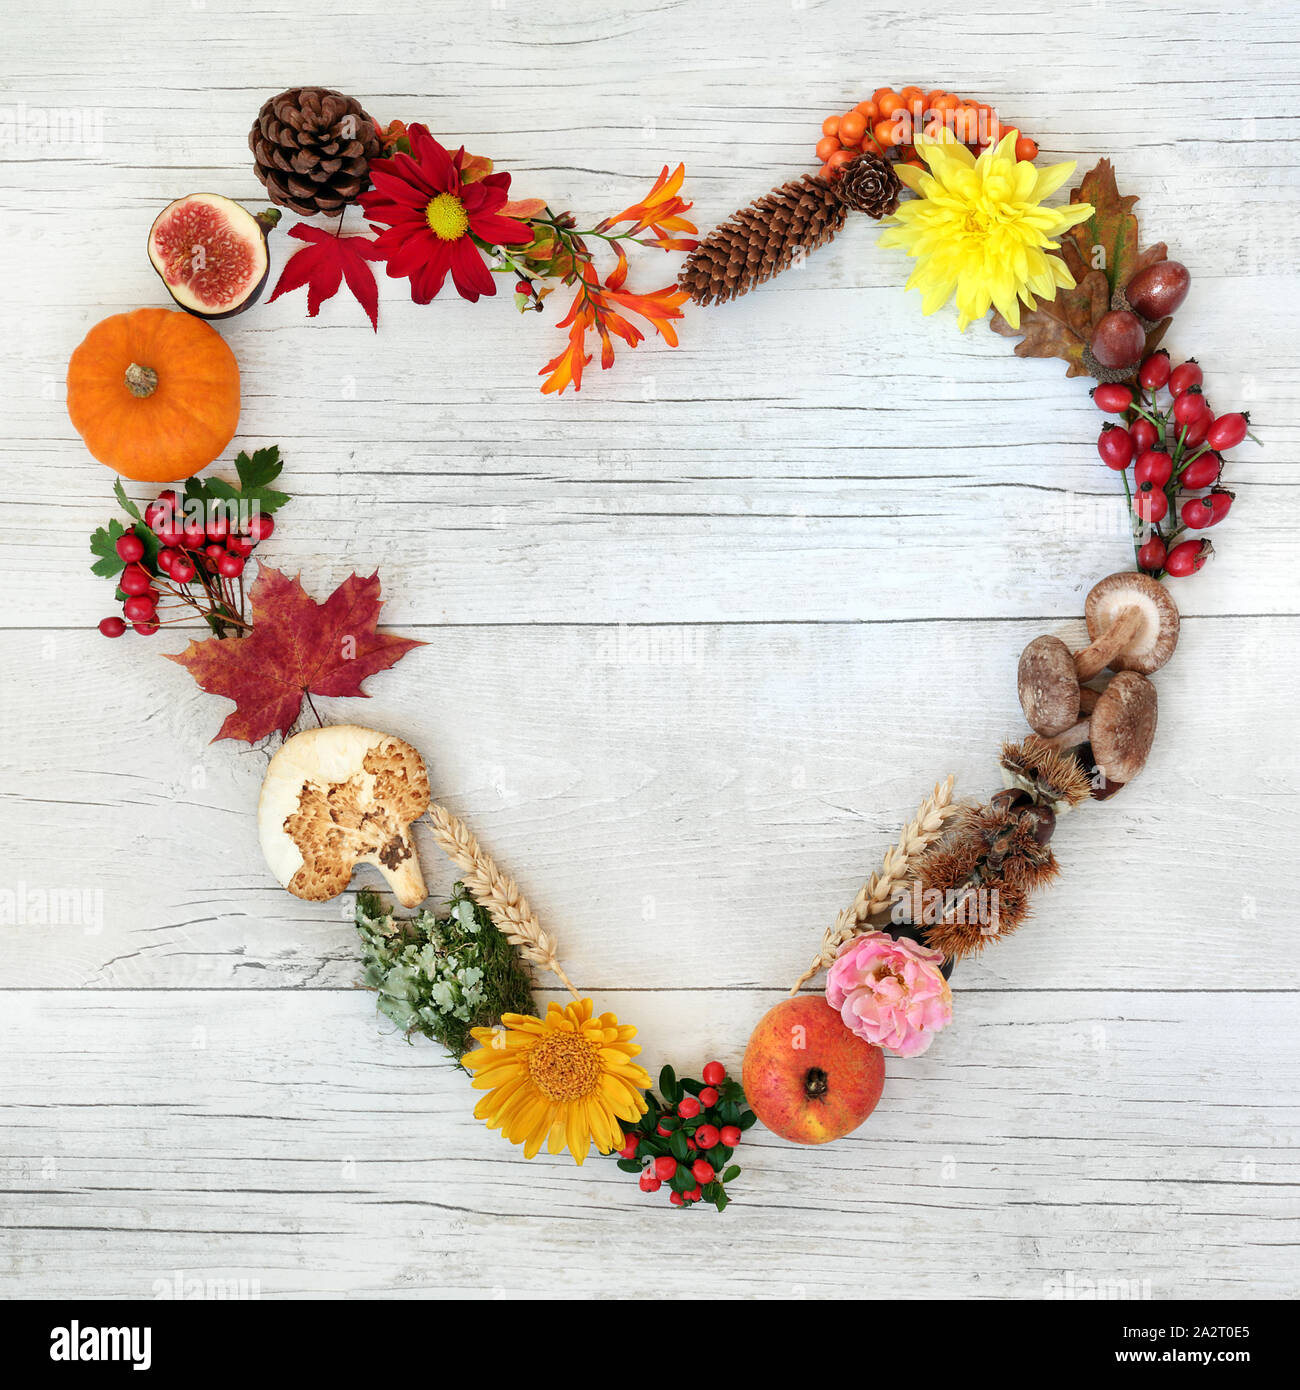 Heart shaped autumn wreath with flora, food and fauna on rustic wood background. Harvest festival theme. Top view. Stock Photo